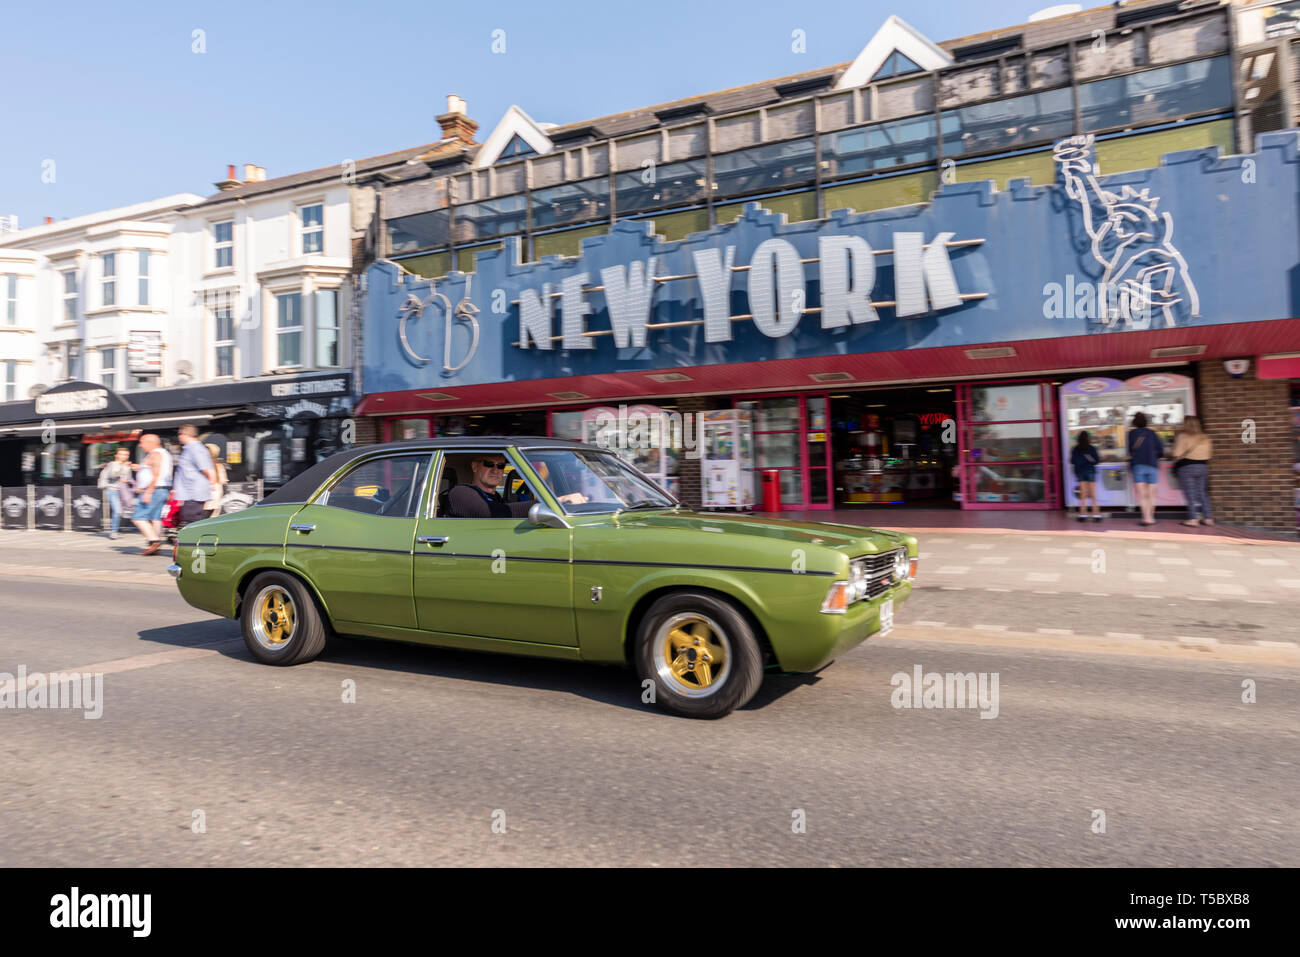 Ford Cortina Mark III classic car at Southend on Sea, Essex, seafront on a sunny day. Driving on Marine Parade past New York amusements Stock Photo